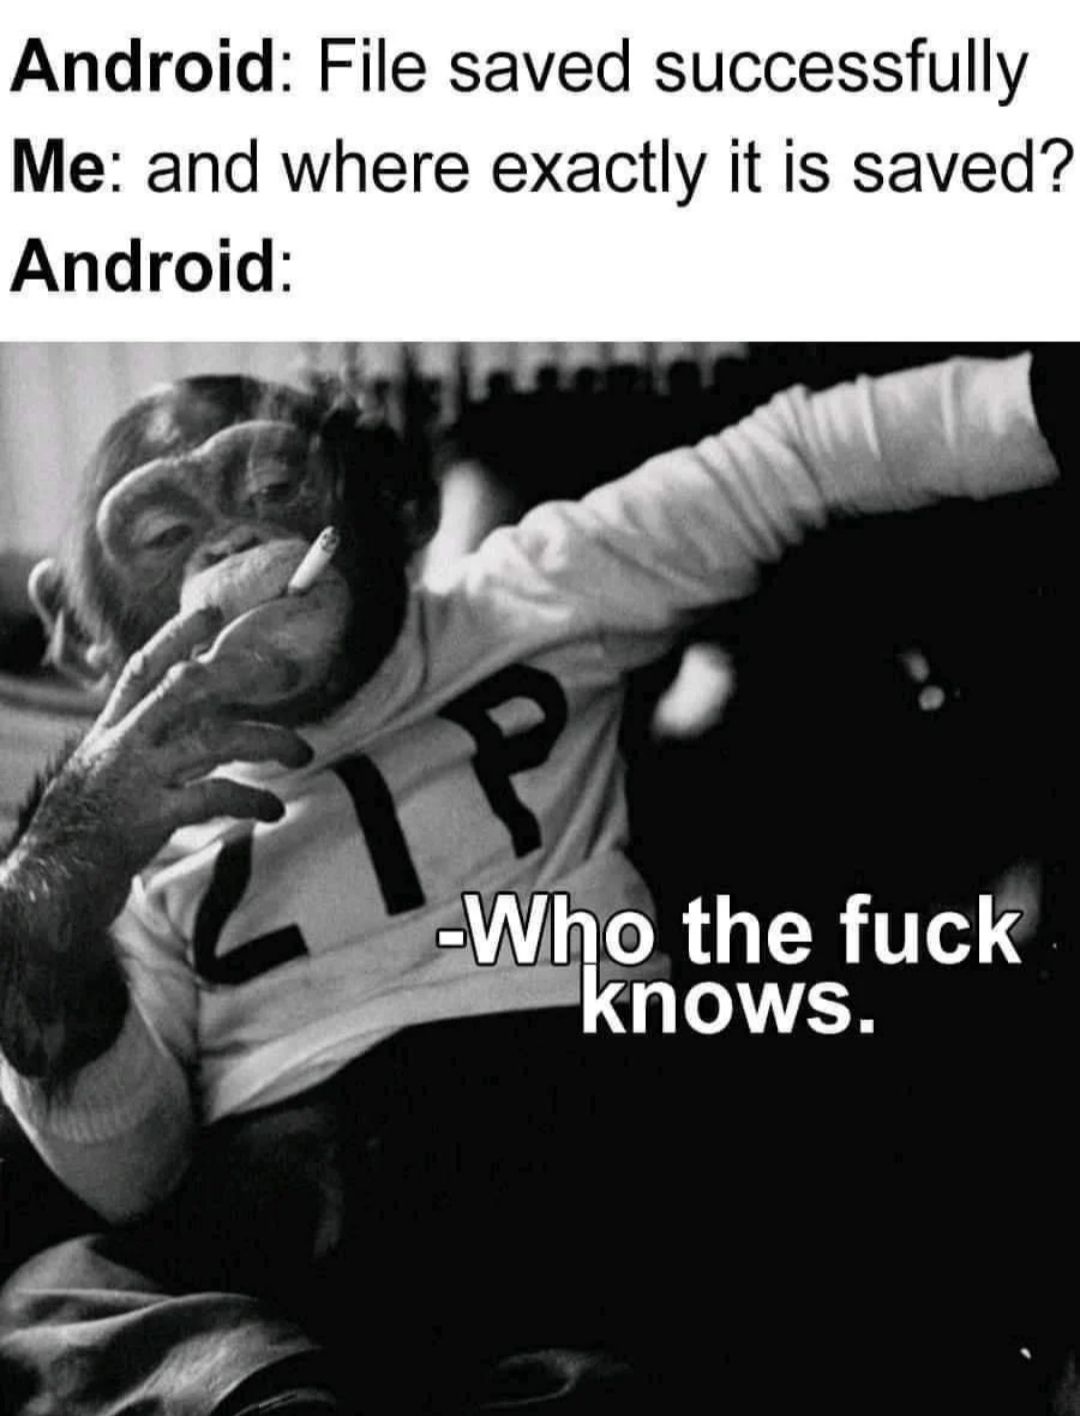 Typical Android thing